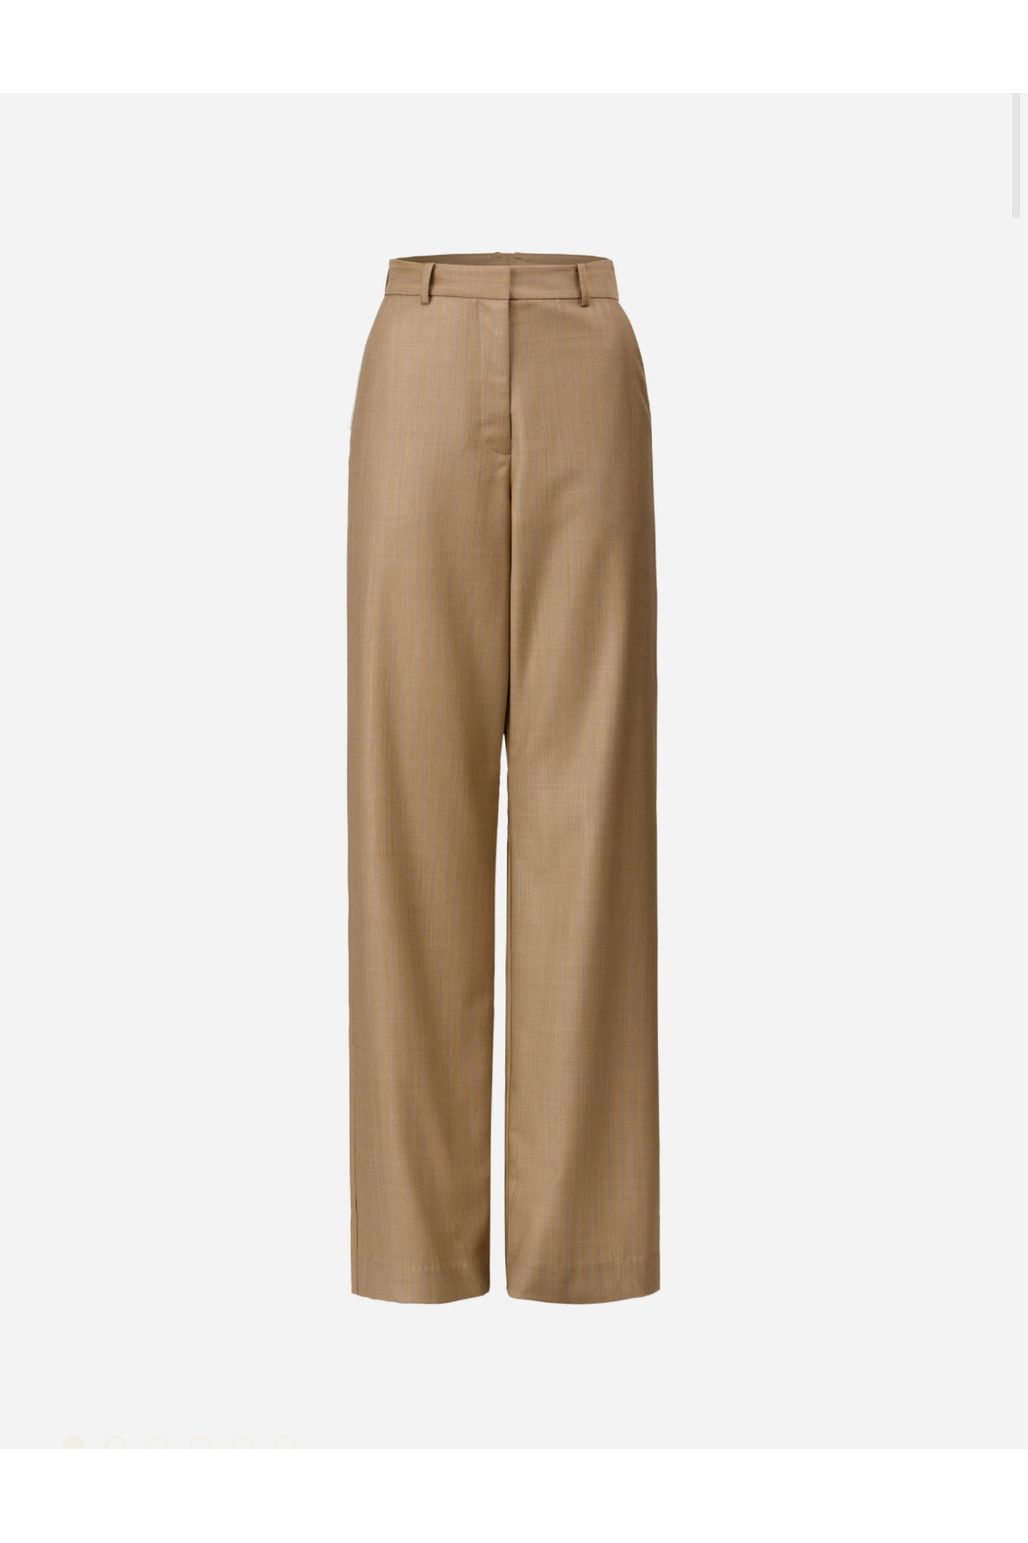 Macleod Wool Trouser in Pin Check by Viktoria & Woods